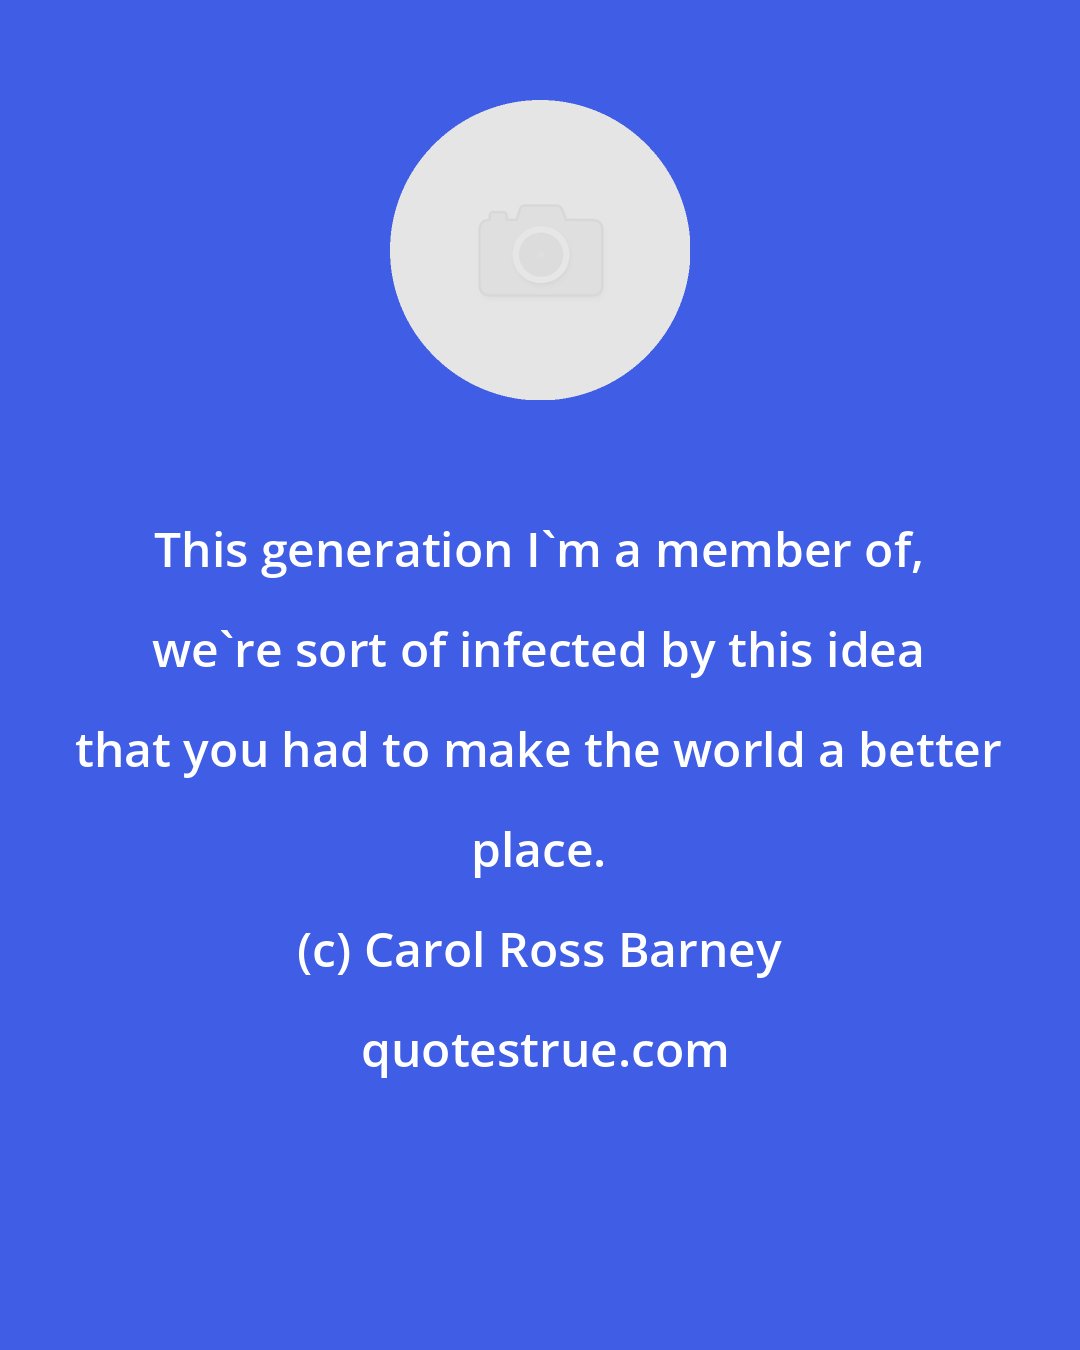 Carol Ross Barney: This generation I'm a member of, we're sort of infected by this idea that you had to make the world a better place.